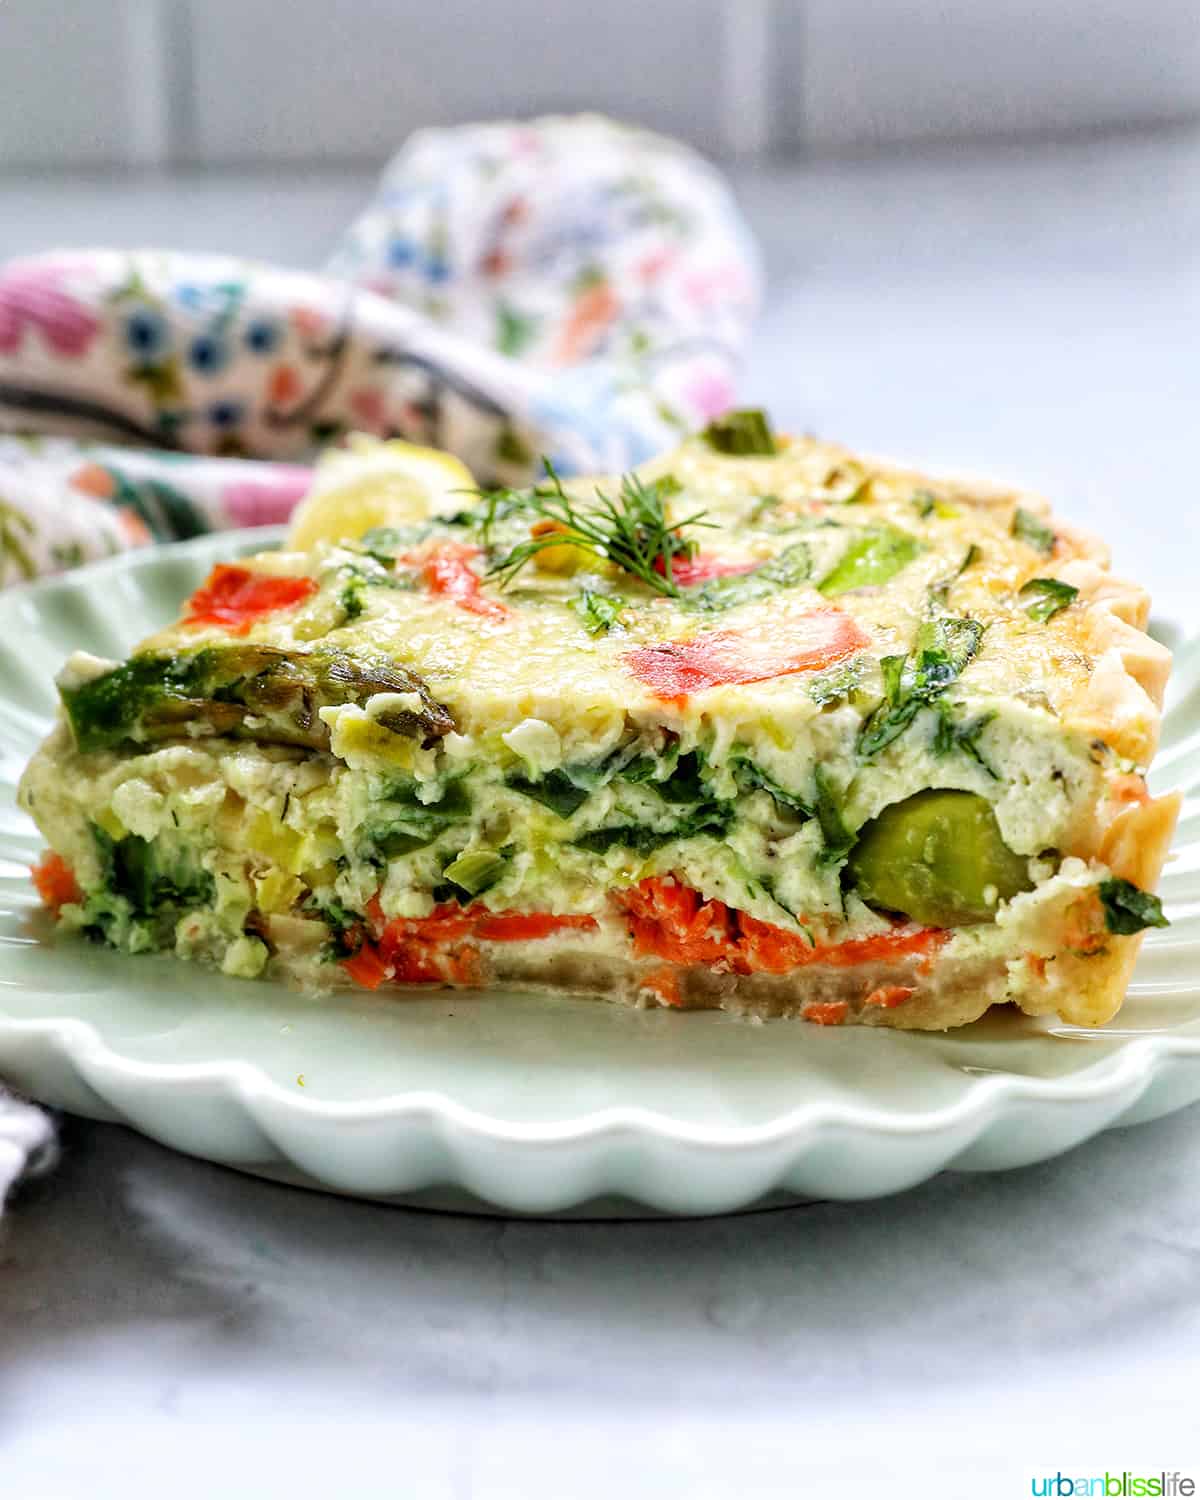 slice of salmon quiche on a plate with the center exposed.